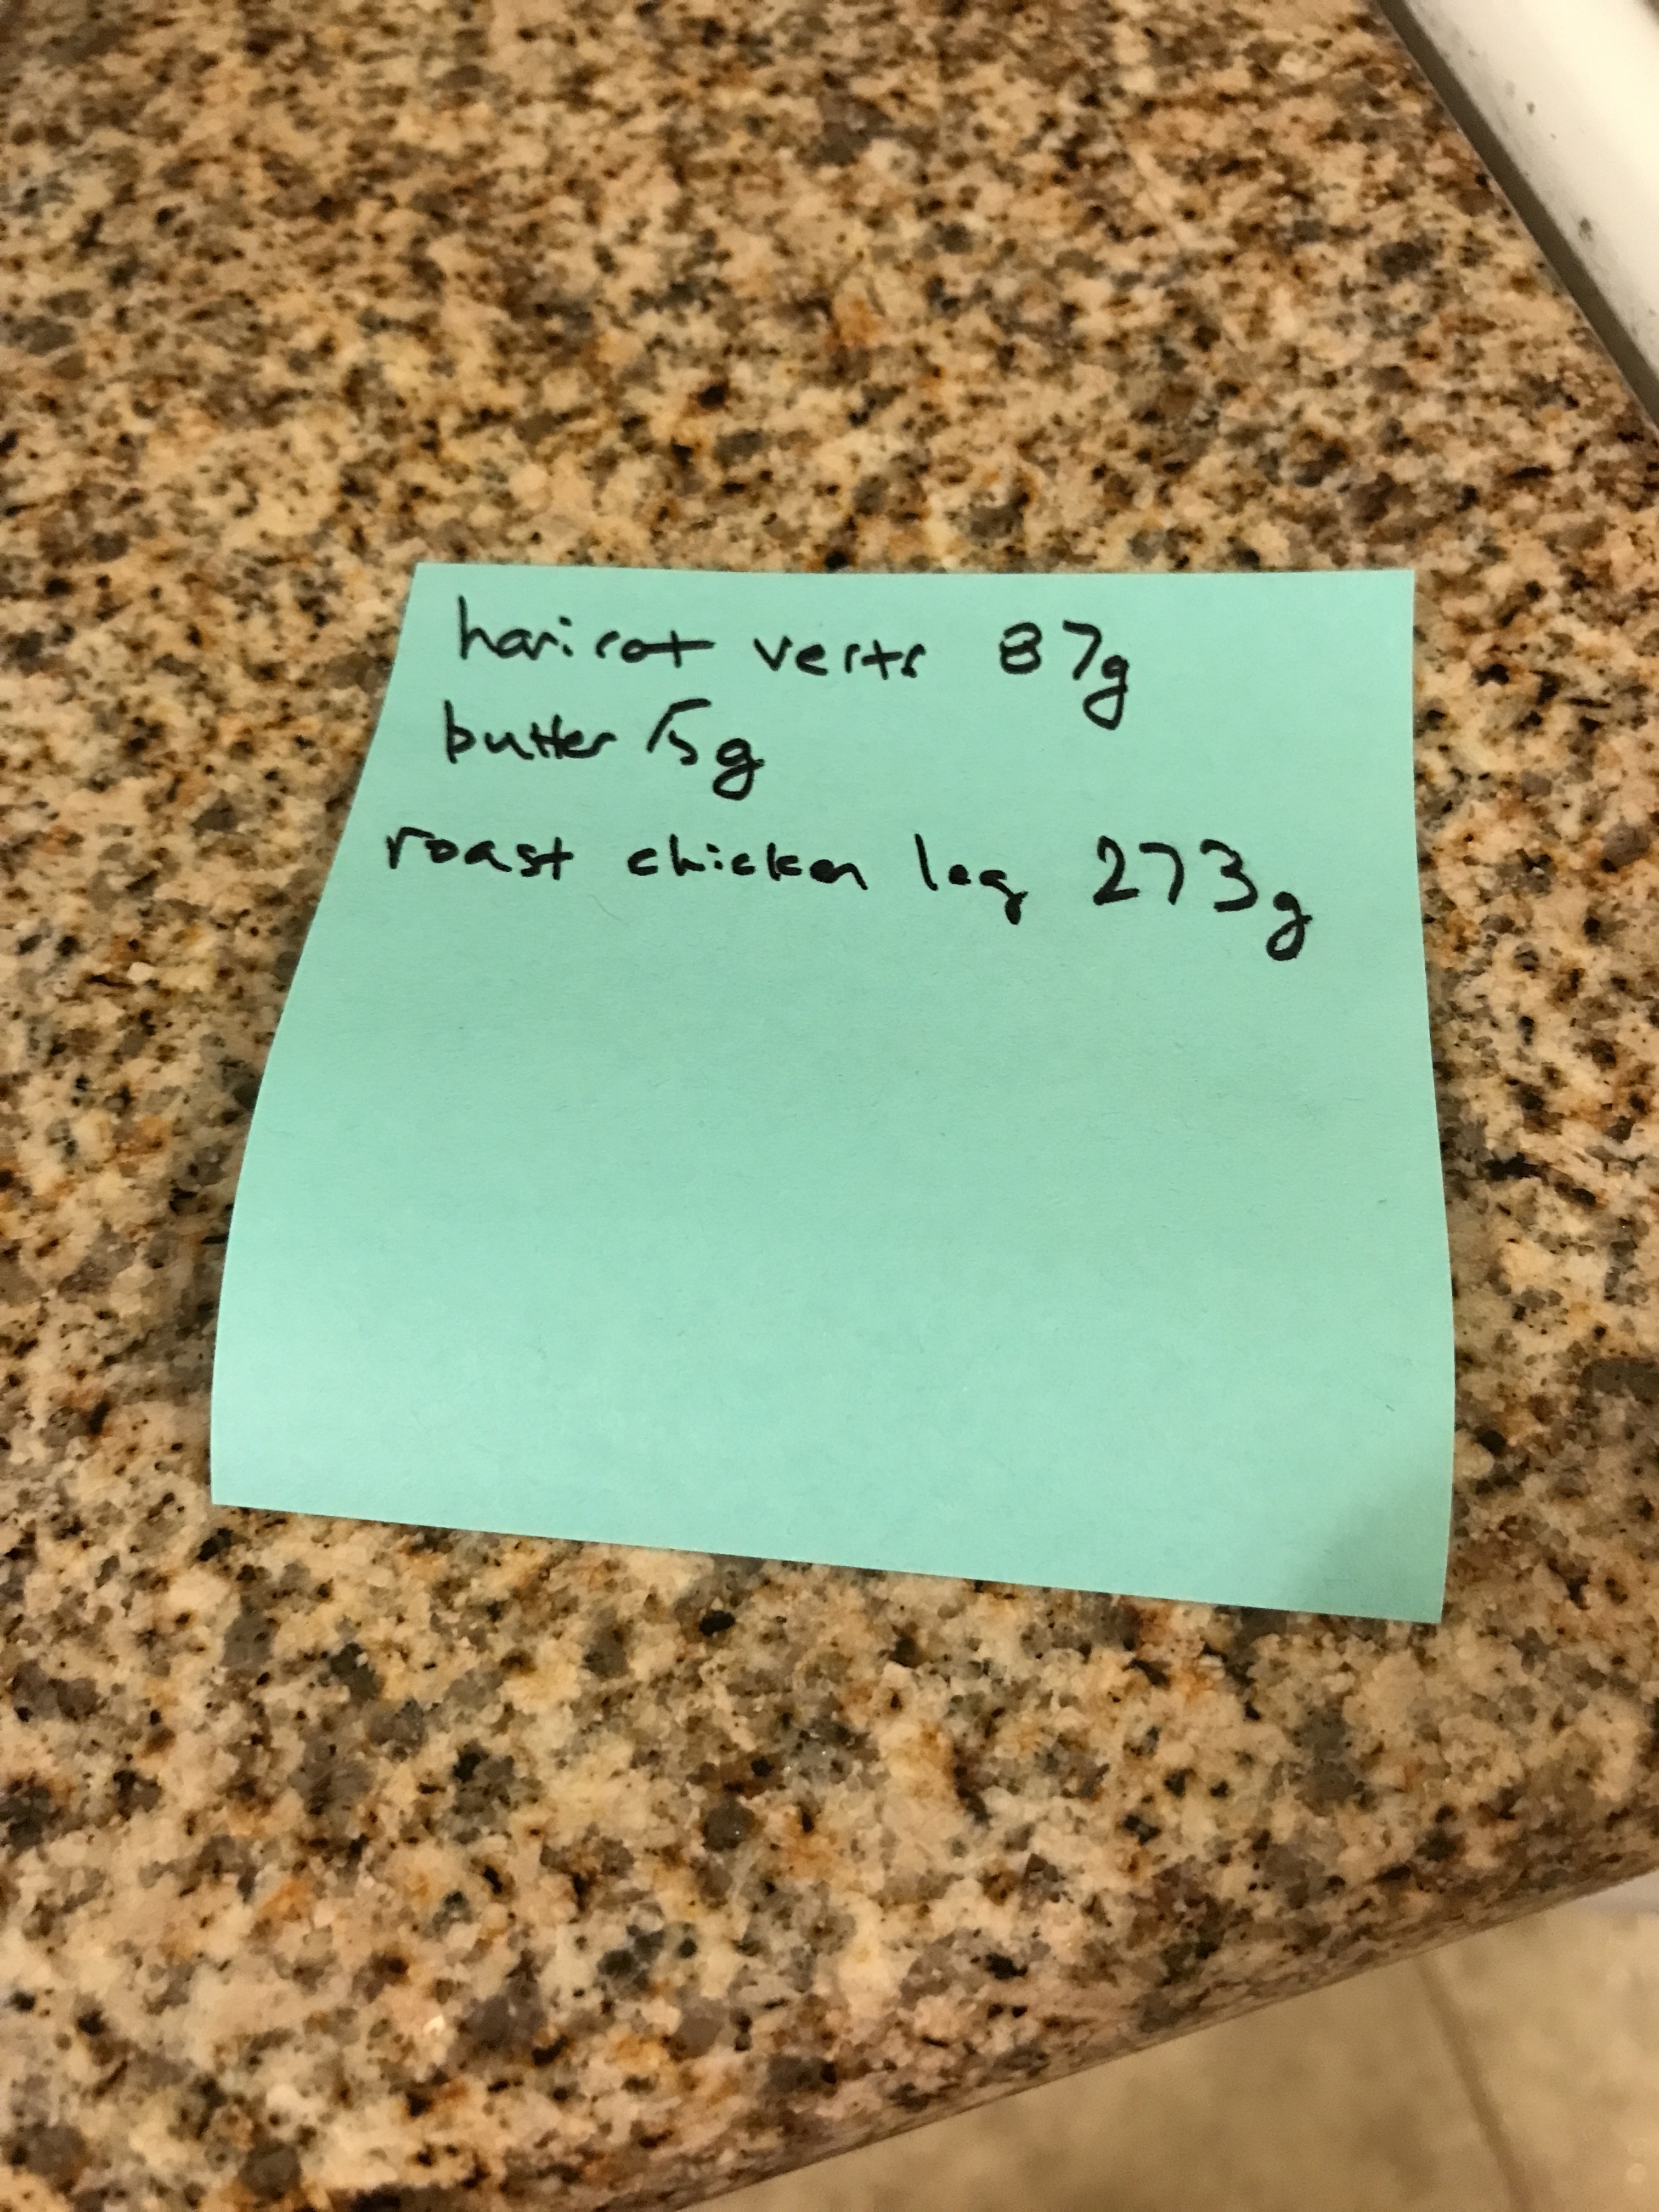 An example sticky note with items and their weights